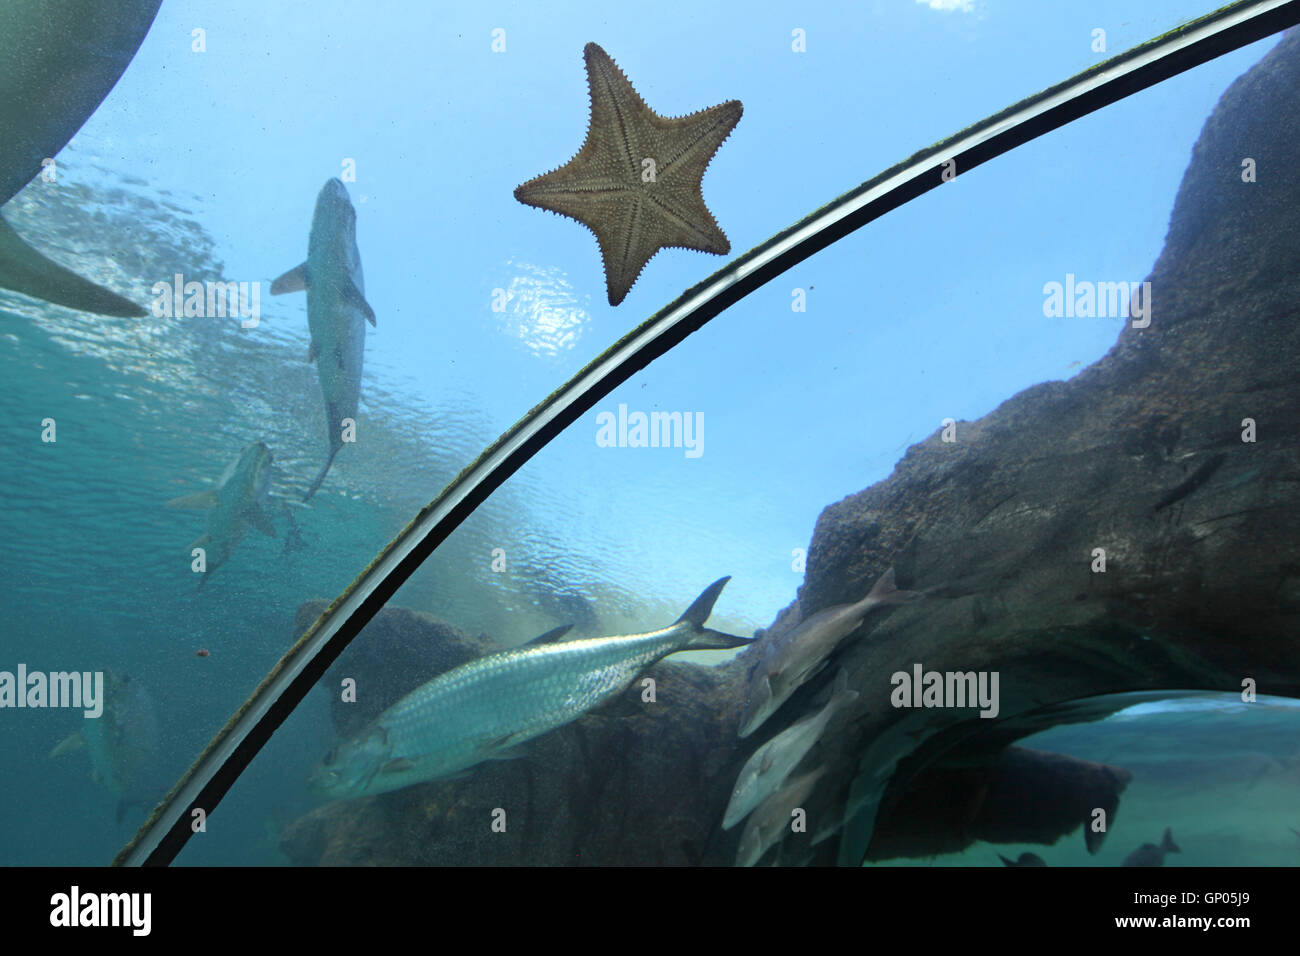 A Starfish on the glass of an aquarium tunnel Stock Photo